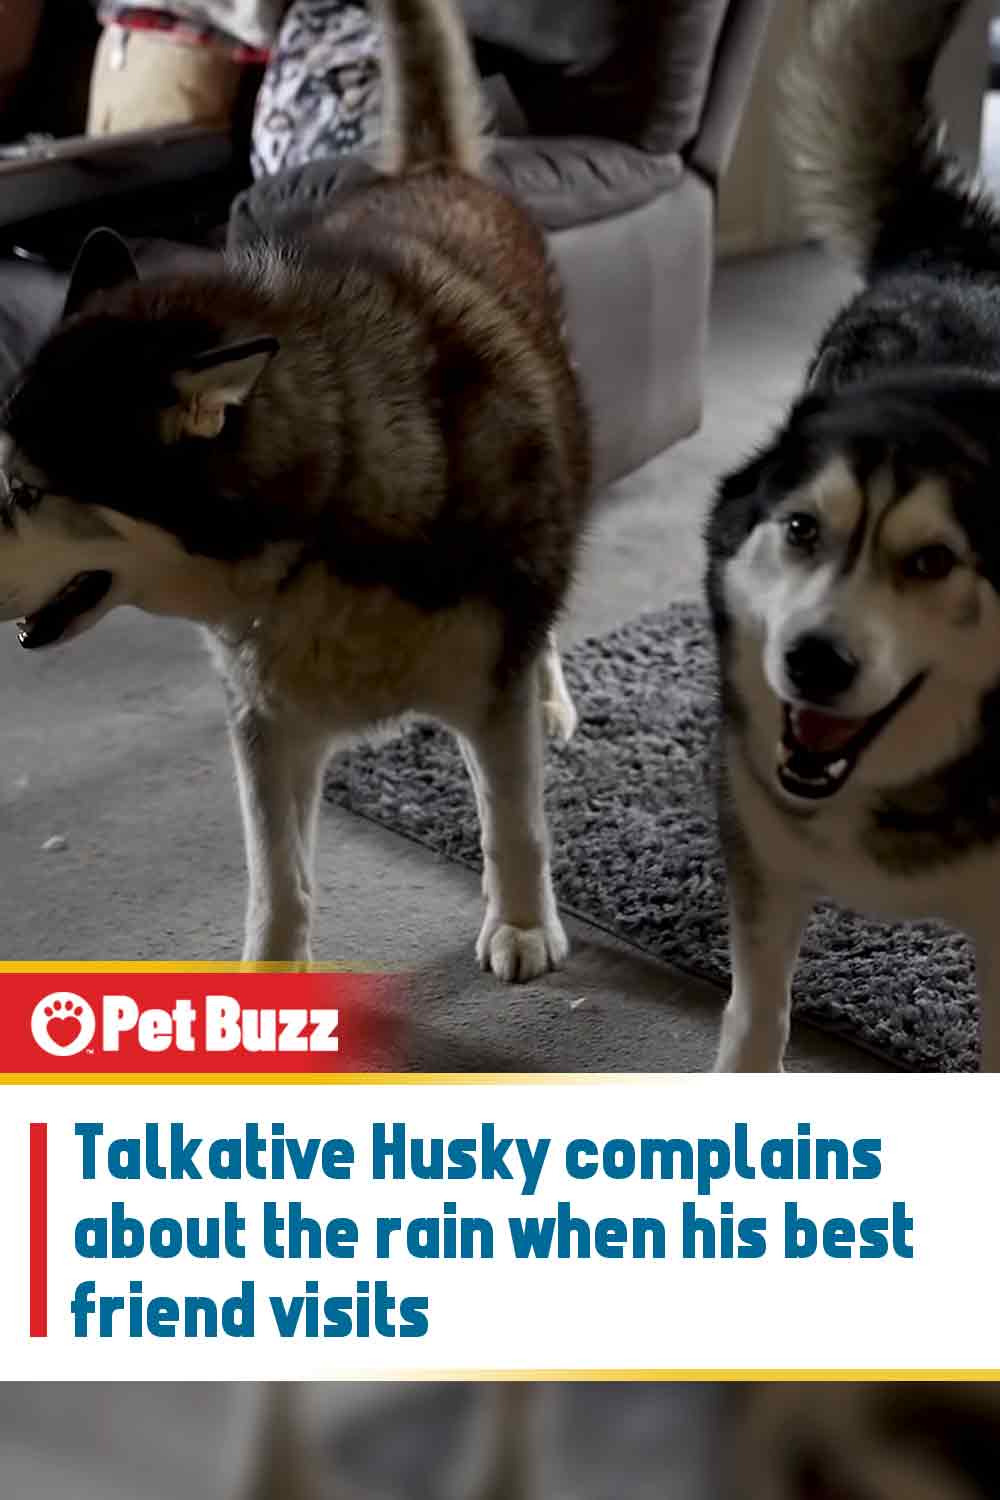 Talkative Husky complains about the rain when his best friend visits